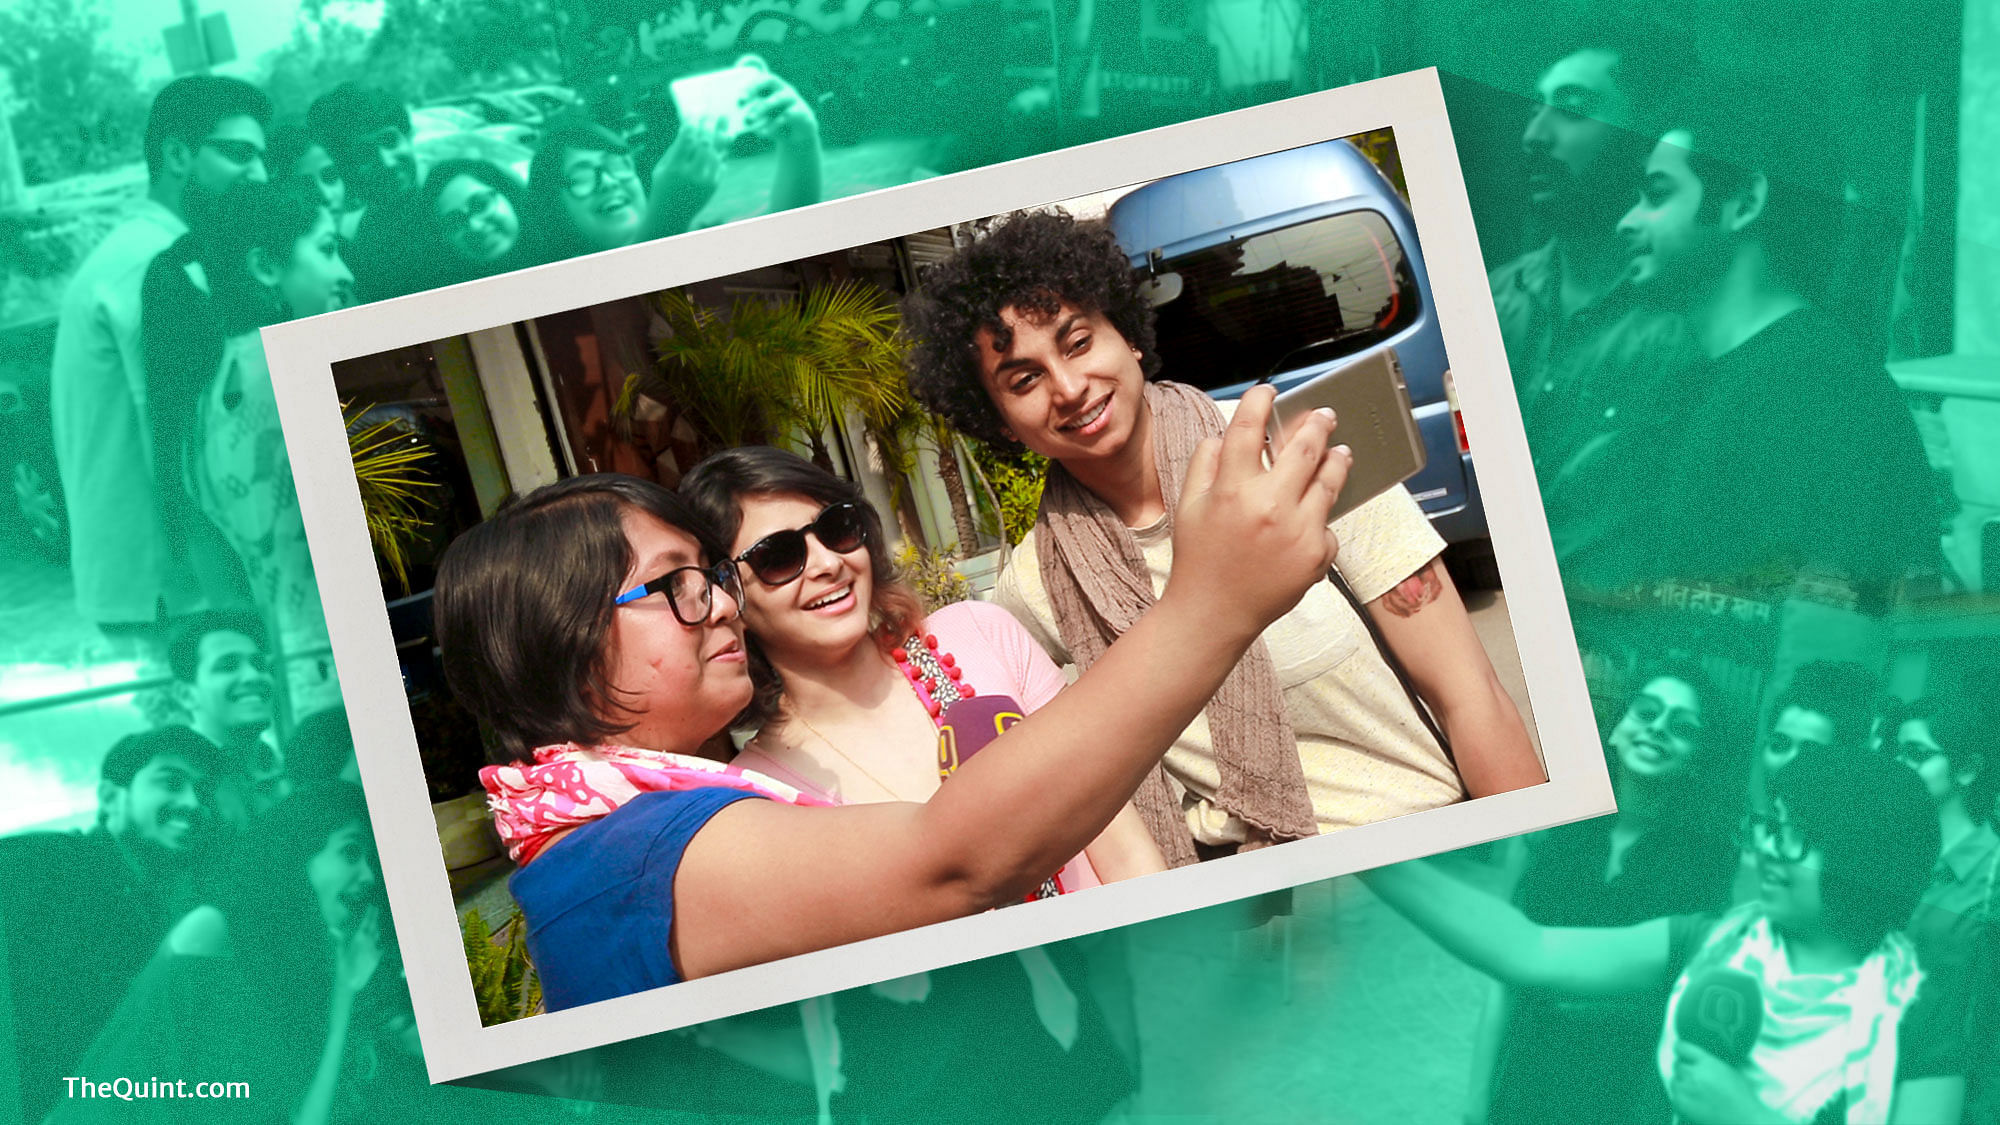 You can’t escape the groupfie fever so it’s better to know your way around a good one!